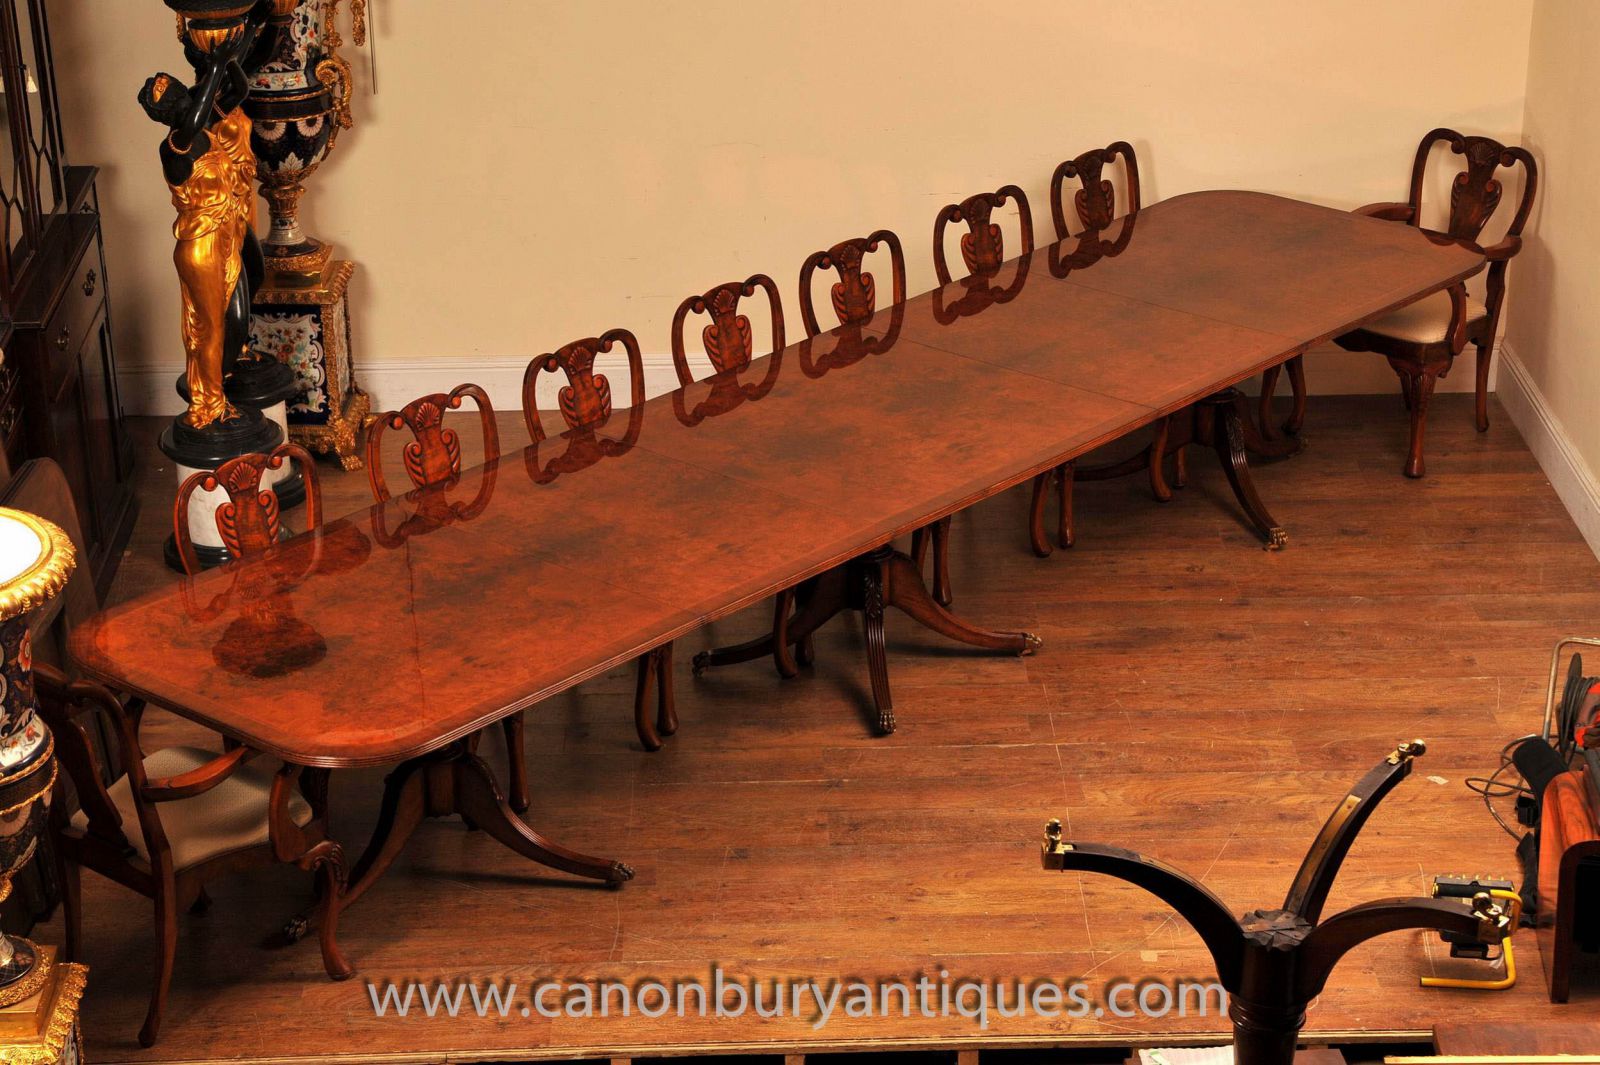 This large Regency dining table would have up to 4 leaves